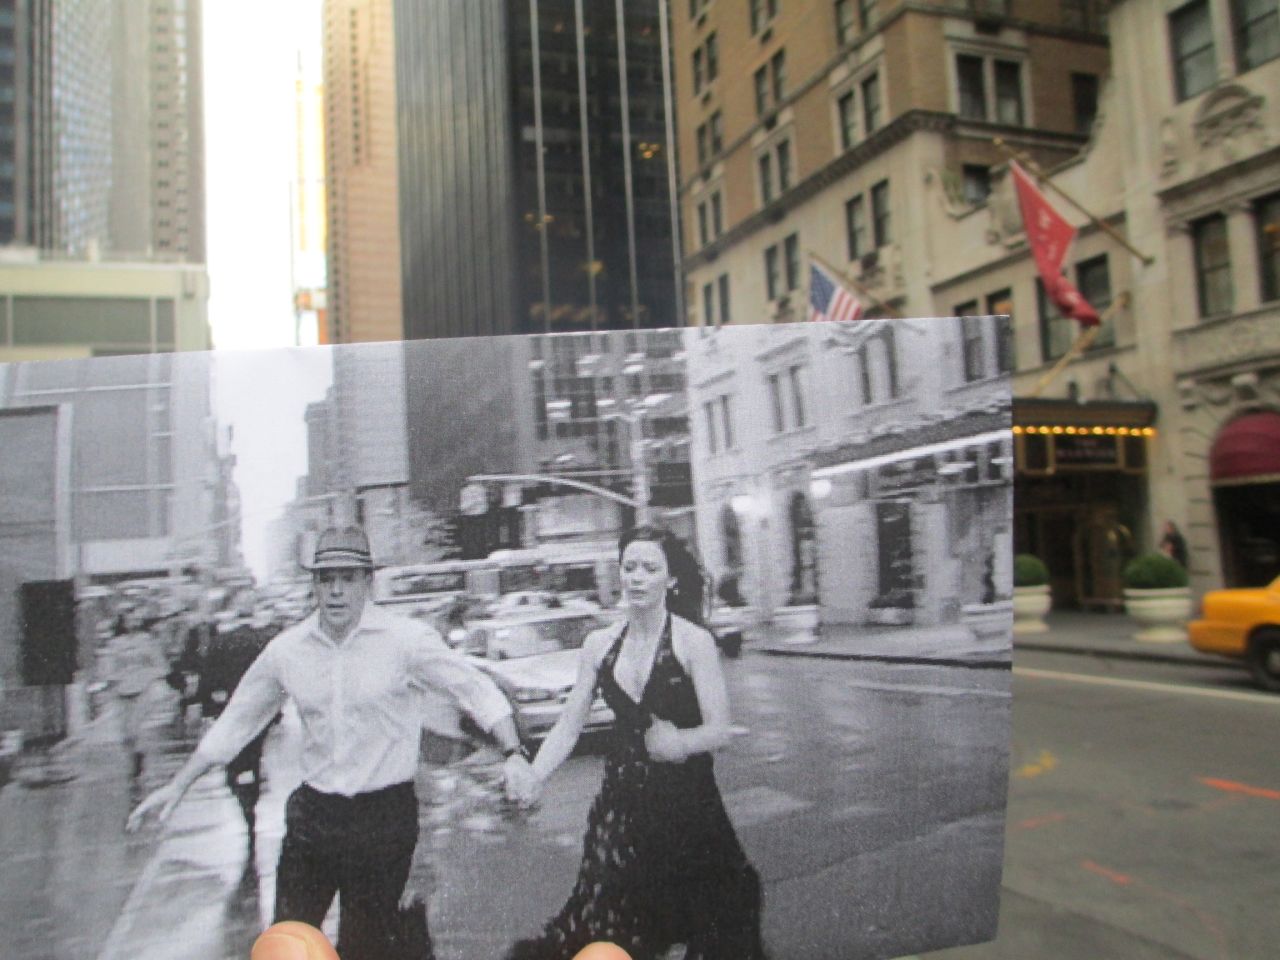 Matt Damon and Emily Blunt race past The Warwick Hotel at 54th Street and 6th Avenue in Manhattan. Film fans will recognize the hotel from the Jack Lemmon film "How to Murder Your Wife." In the background you can see the Hilton Hotel featured in "Michael Clayton" and "Malcolm X."